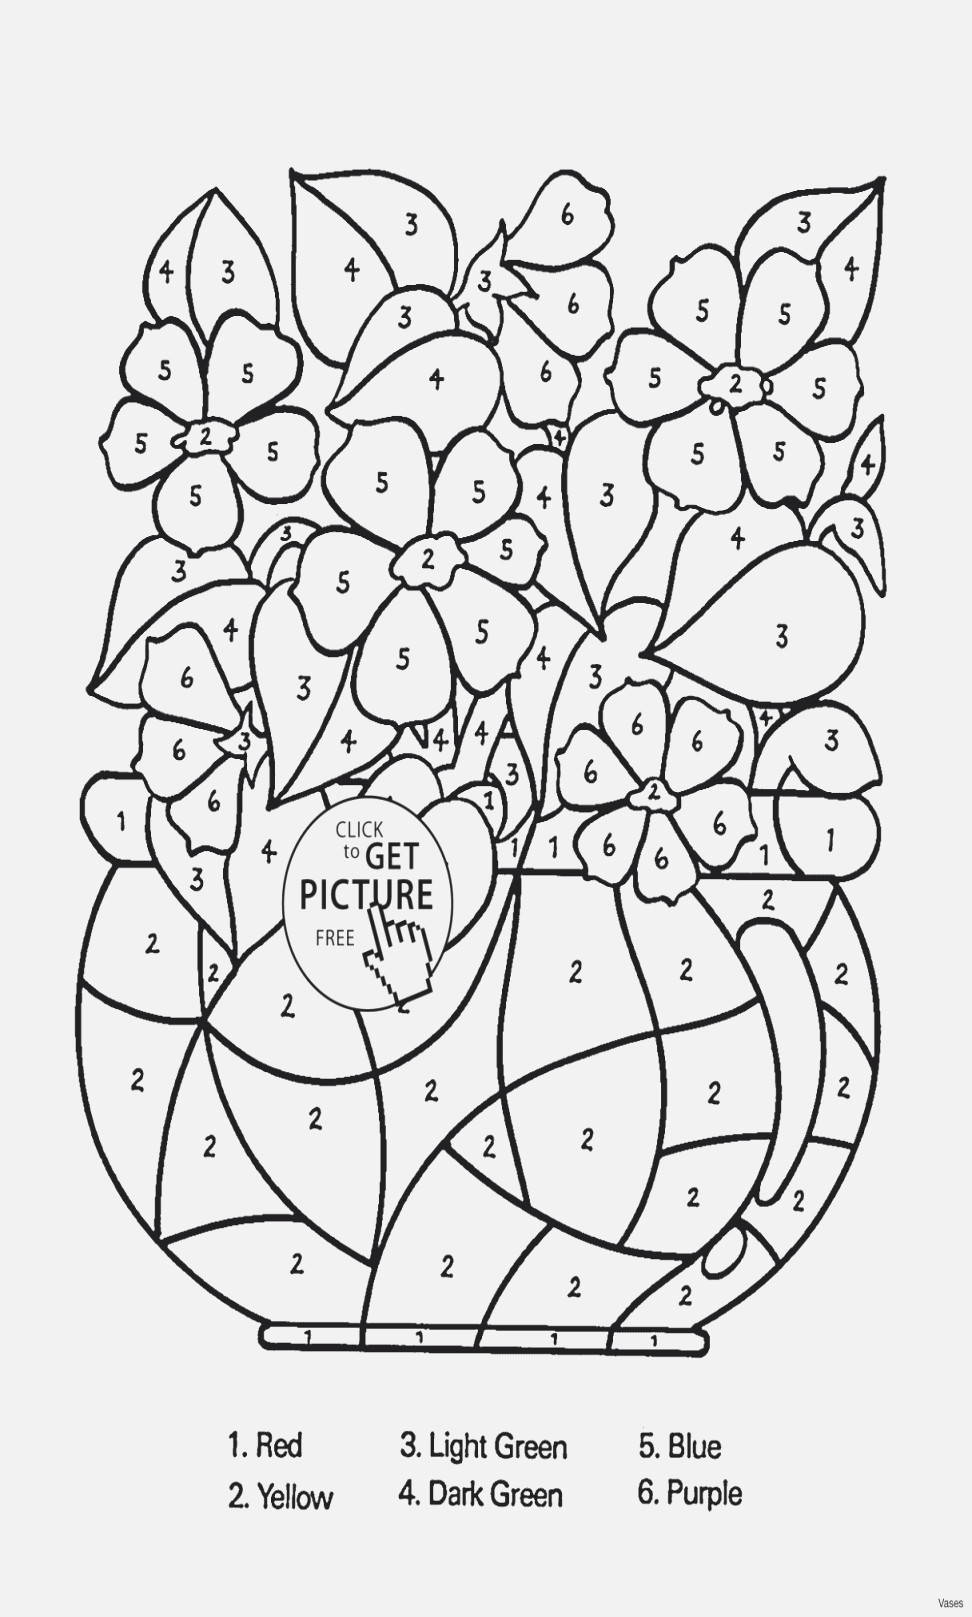 24 Stylish Red Flowers In Vase 2024 free download red flowers in vase of easy coloring pictures vases flower vase coloring page pages flowers for easy coloring pictures vases flower vase coloring page pages flowers in a top i 0d and free